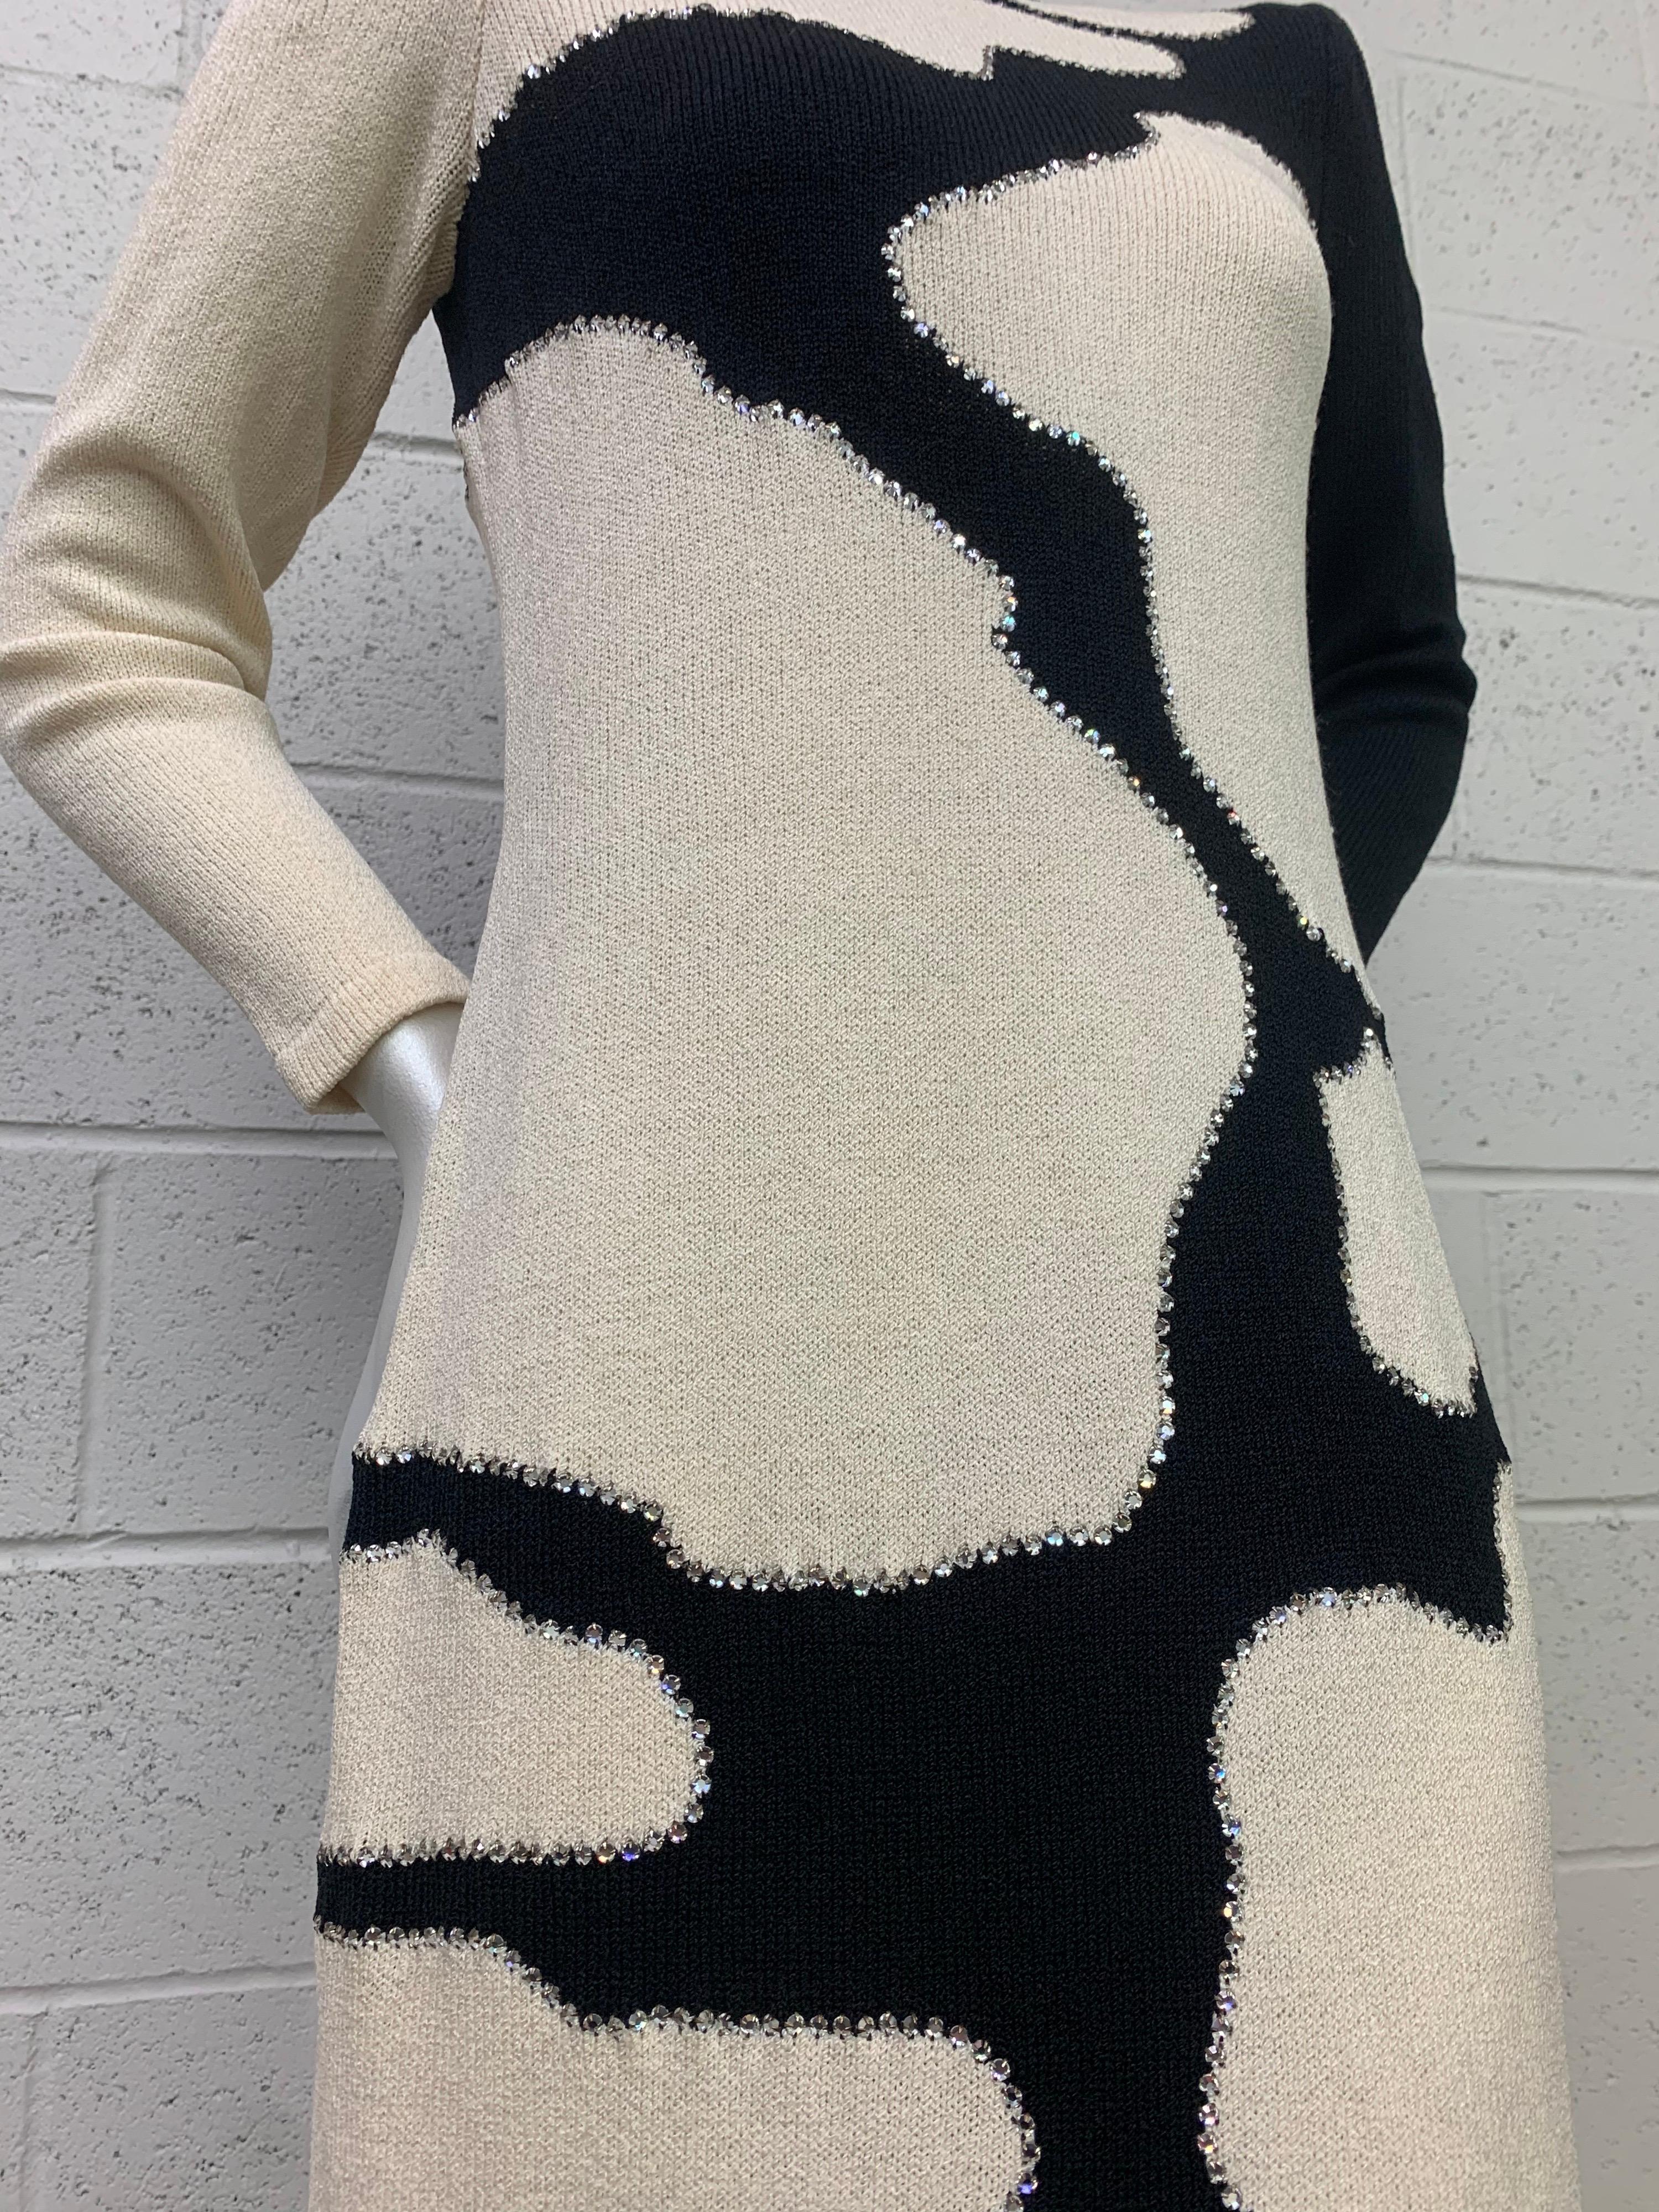 Gray 1970s Adolfo Black and White Graphic Maxi Knit Dress w/ Rhinestone Accents For Sale